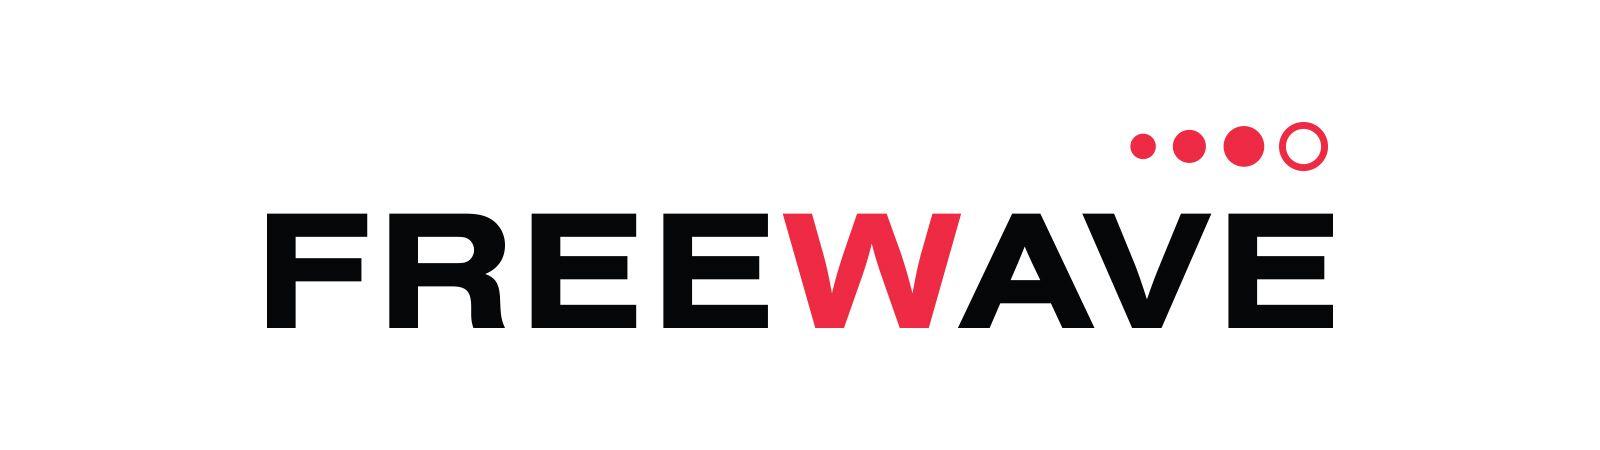 FreeWave Logo - FreeWave Technologies | Technology Sector | TA | A Private Equity Firm